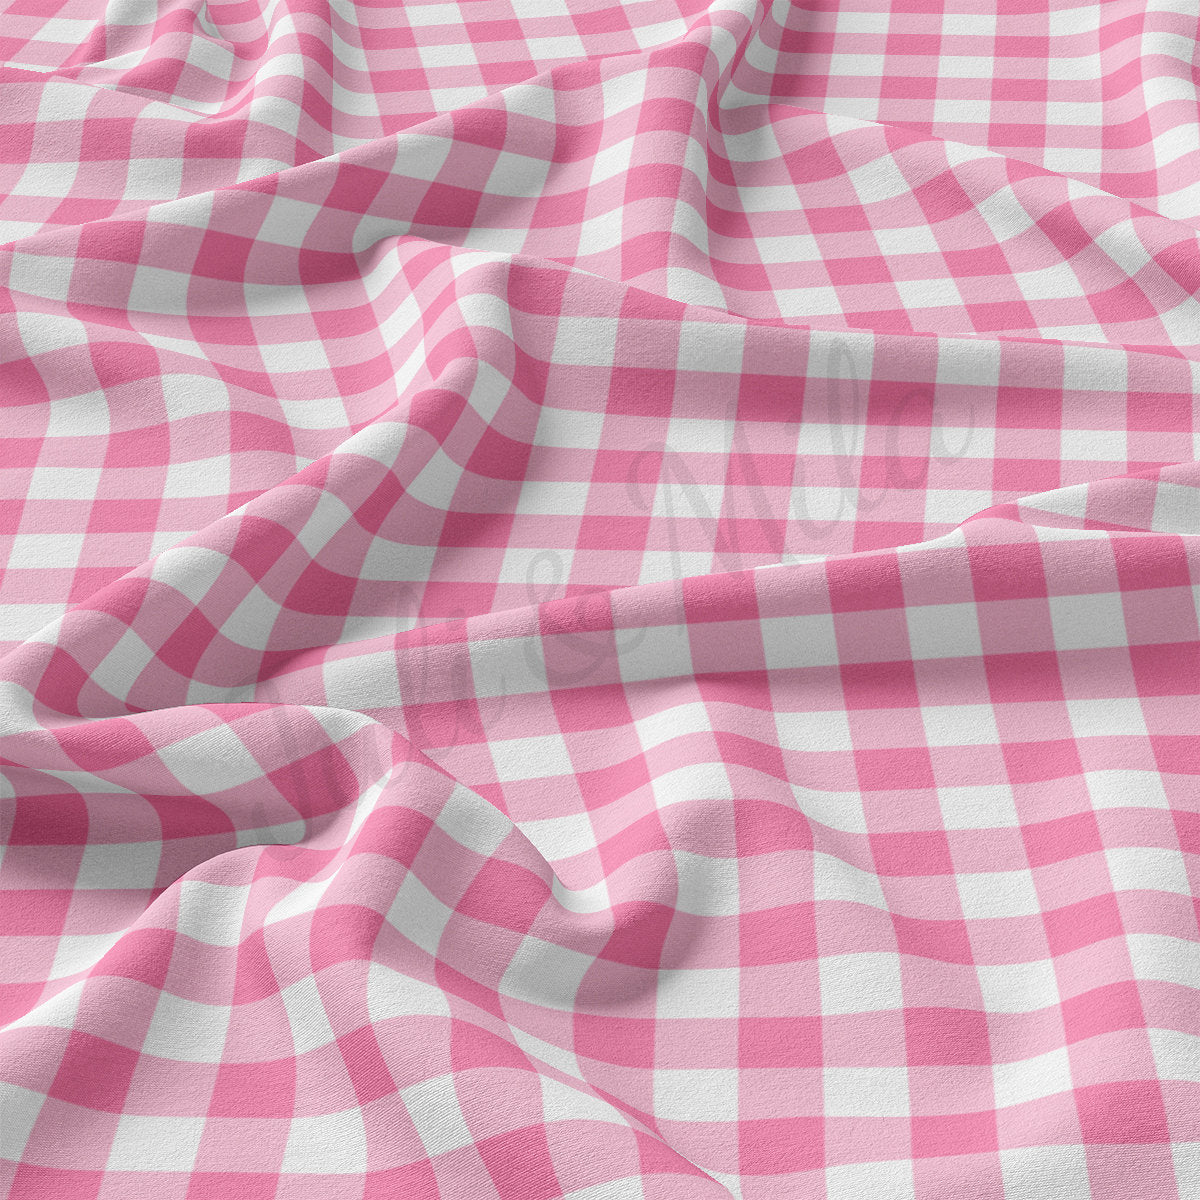 DBP Fabric Double Brushed Polyester Fabric DBP2406